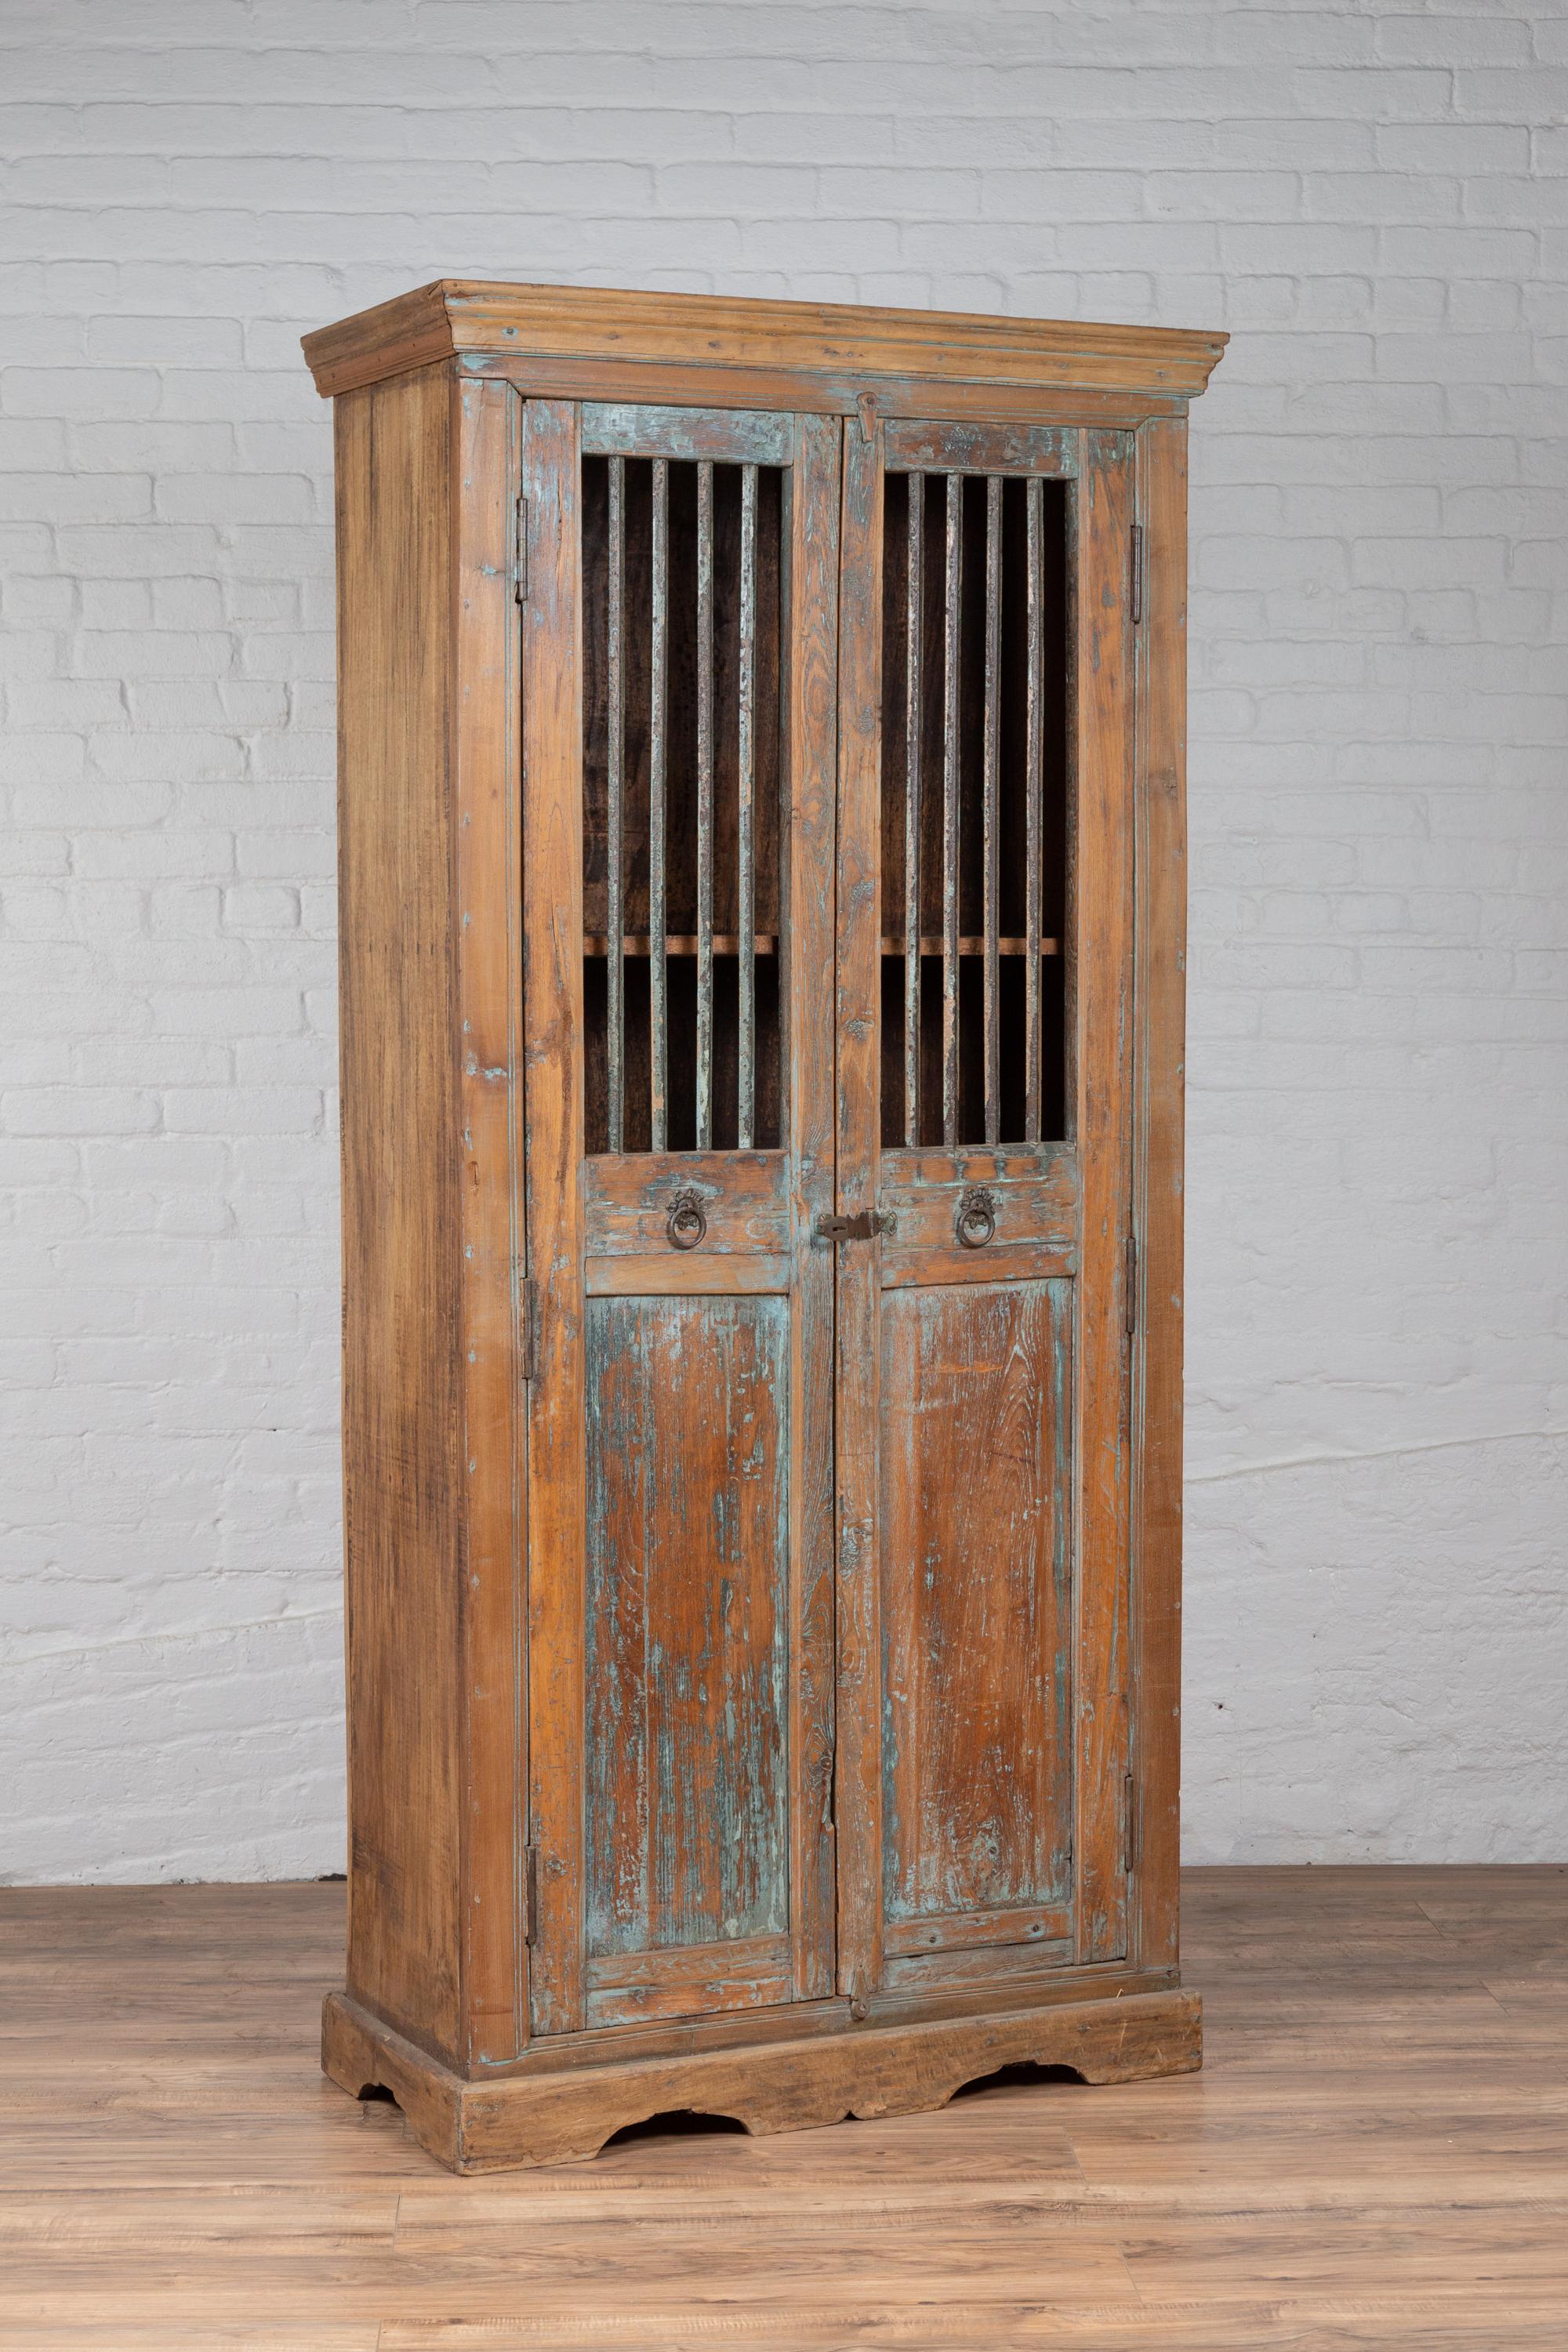 Early 20th Century Indian Rustic Wooden Kitchen Cabinet with Distressed Finish For Sale 4